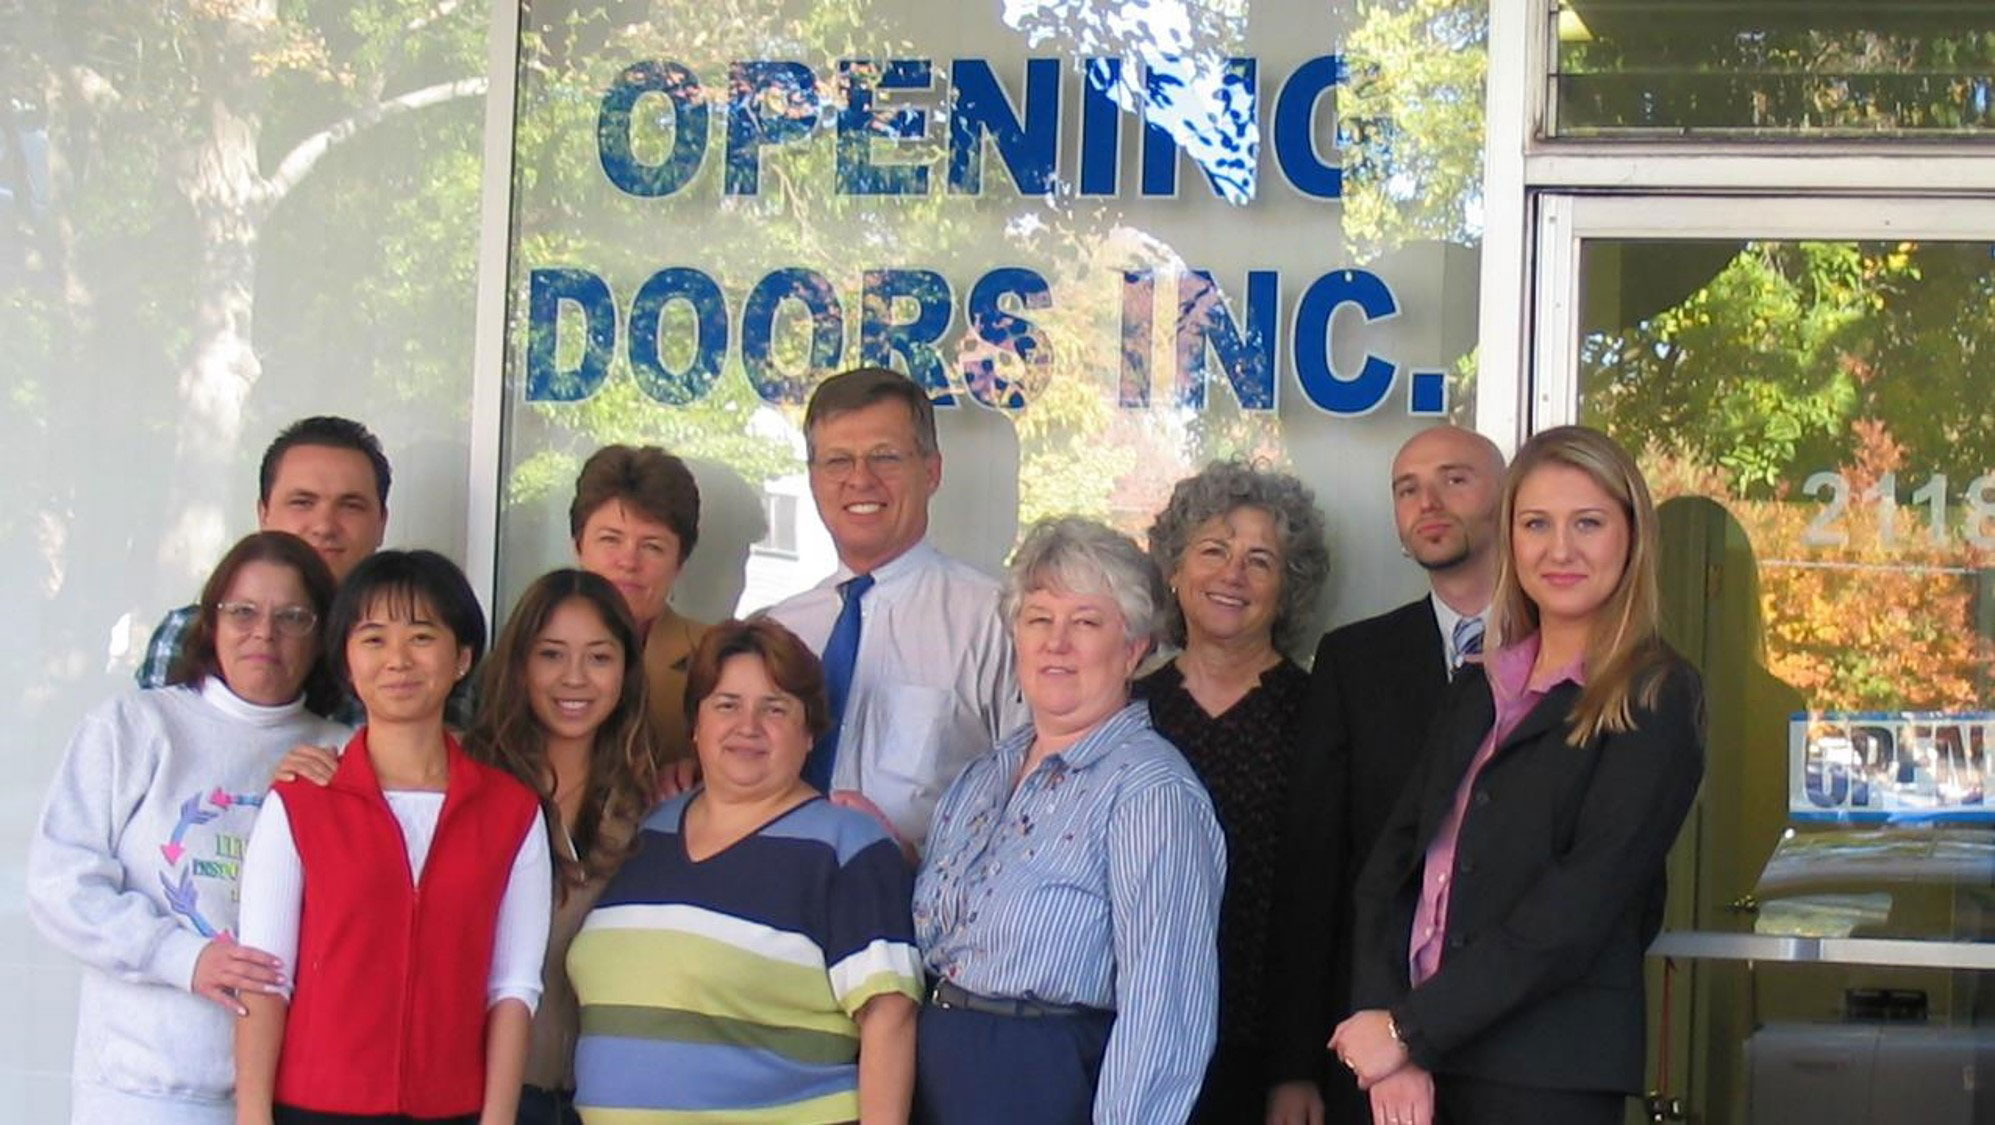 Picture of the Opening Doors Staff when it first opened